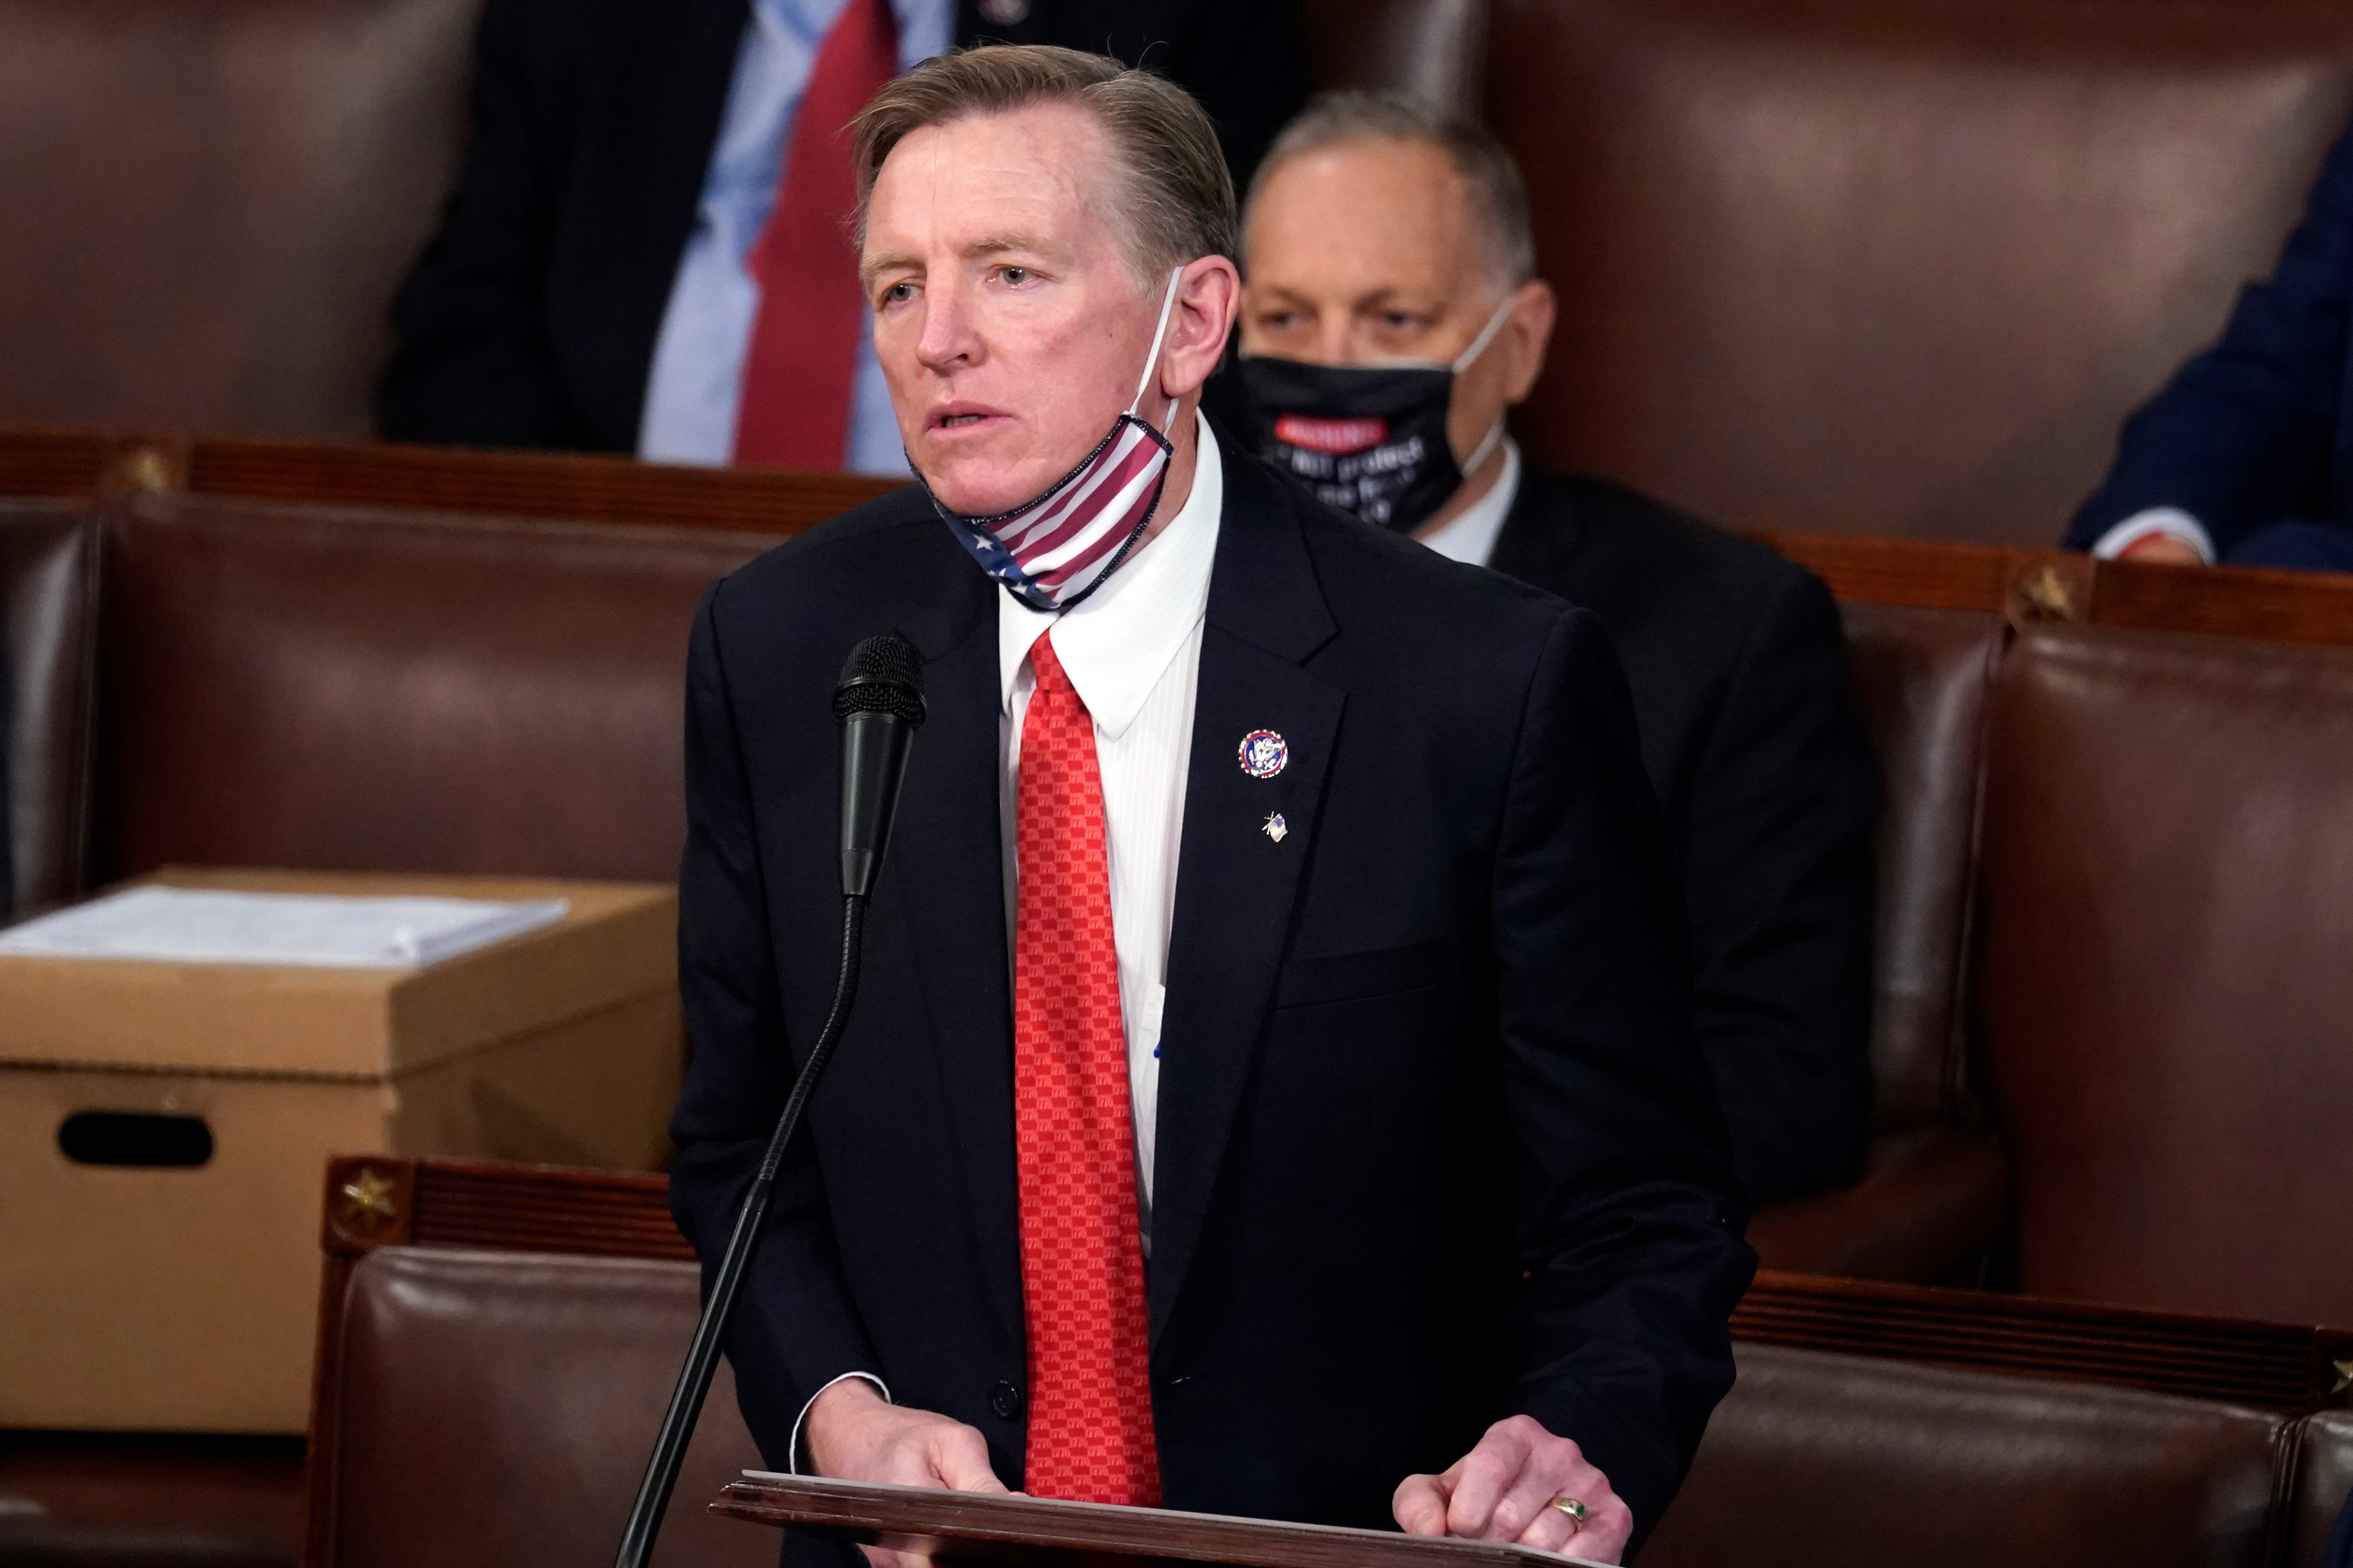 Rep. Paul Gosar, R-Ariz., objects to certifying Arizona's Electoral College votes during a joint session of the House and Senate convenes to count the electoral votes cast in November's election, at the Capitol on Jan. 6, 2021.